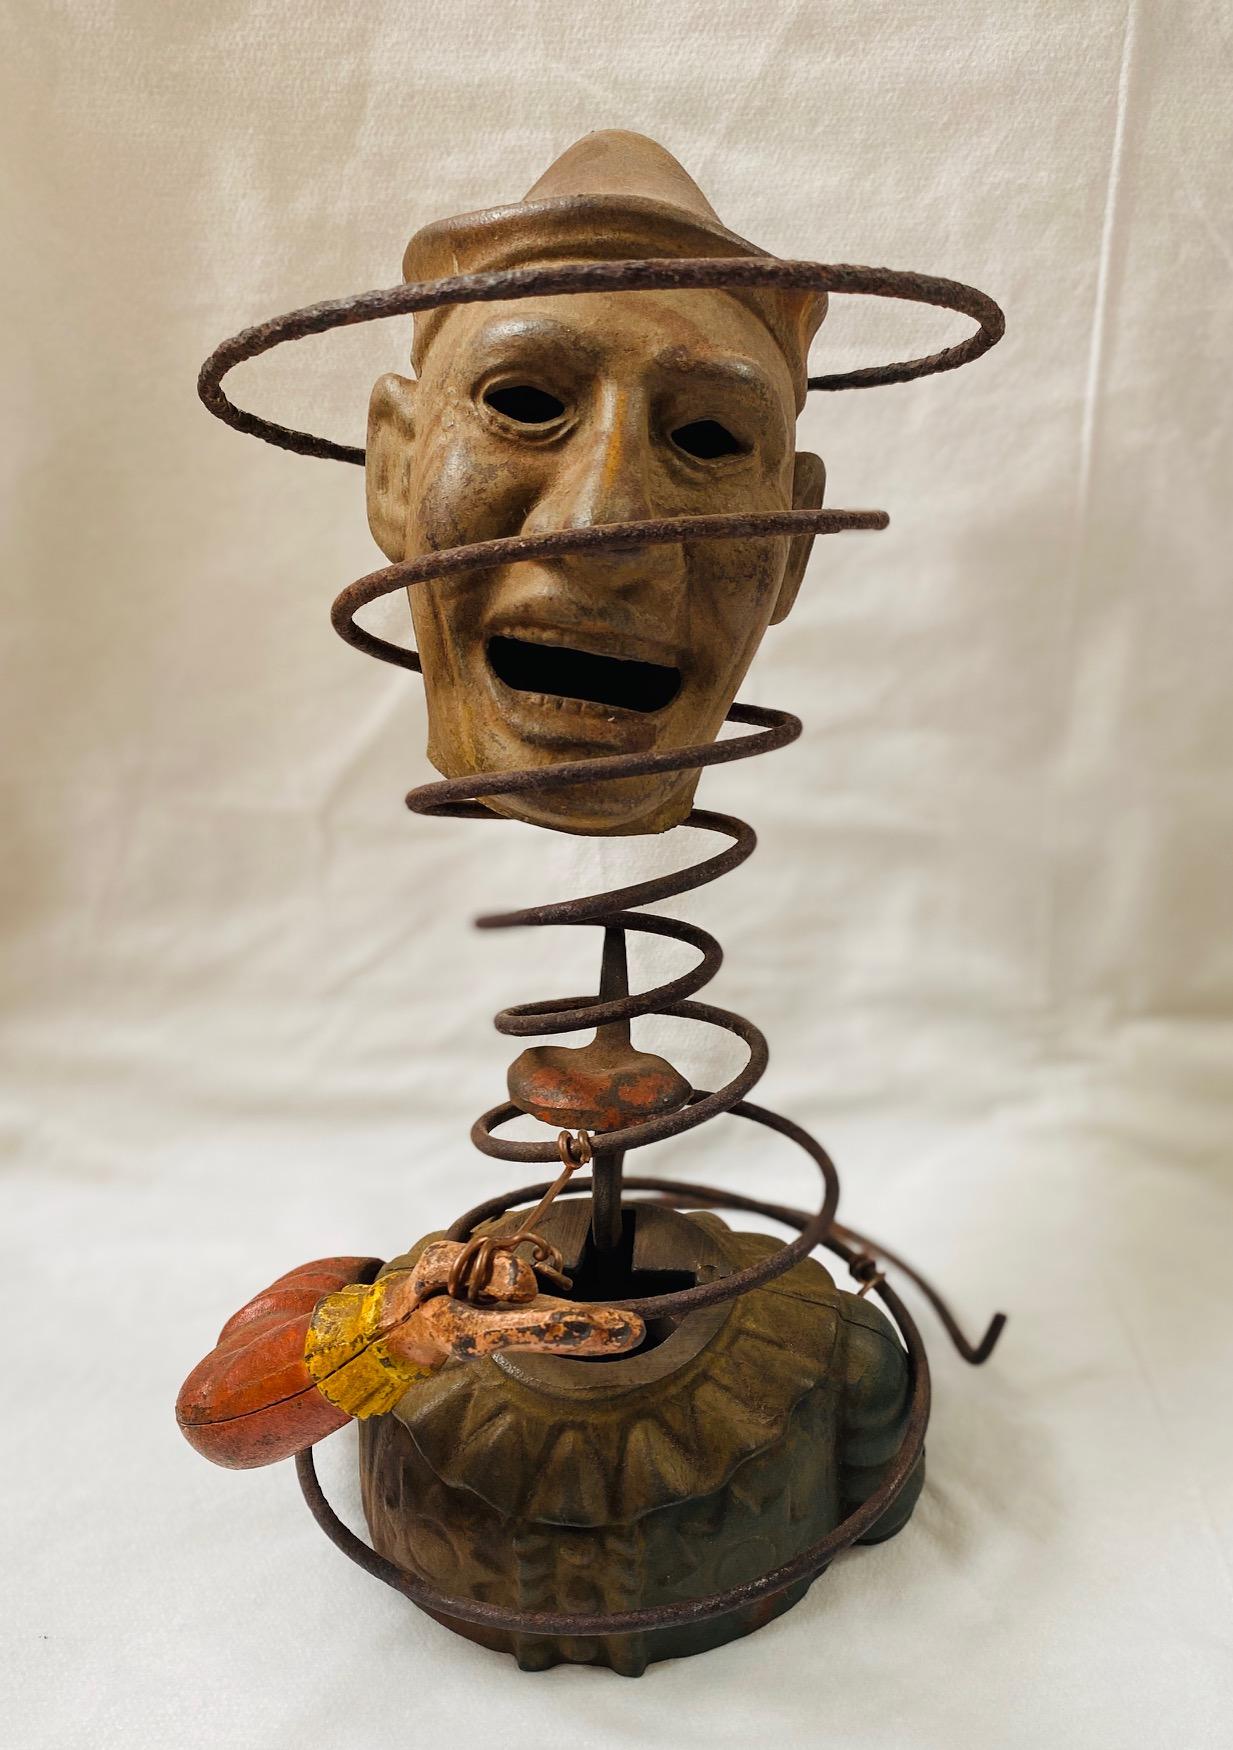 Folk Art up-cycled clown sculpture, 19th and 20th centuries - a clever combination and merging of several old fragments and salvaged material to create a compelling new artwork. The unknown artist took two pieces of a 19th Century Humpty Dumpty